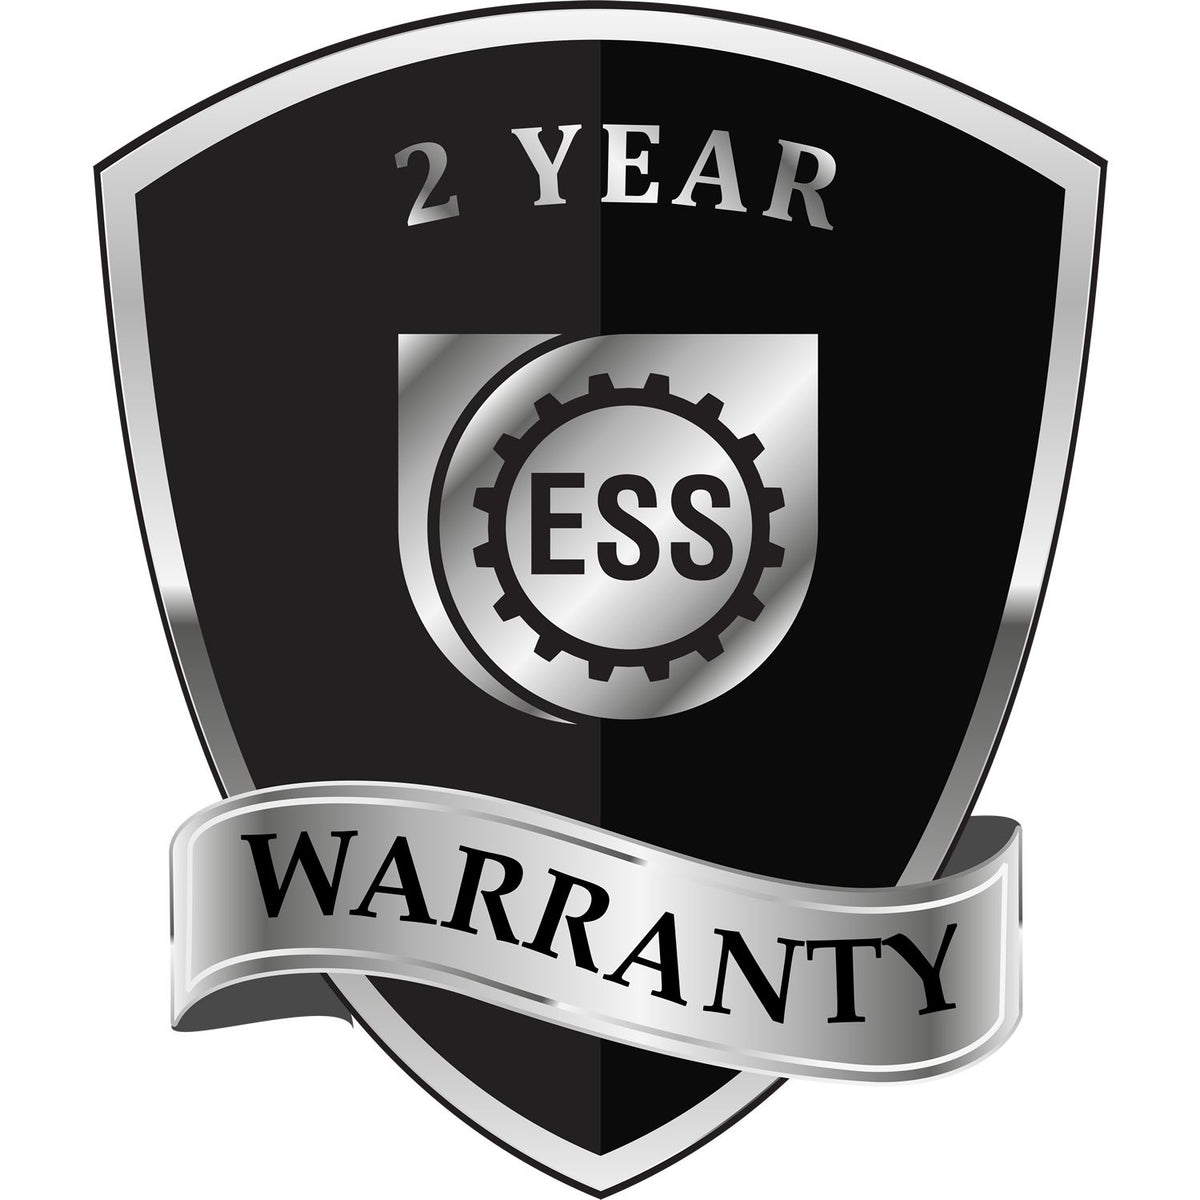 A black and silver badge or emblem showing warranty information for the Hybrid New Jersey Architect Seal